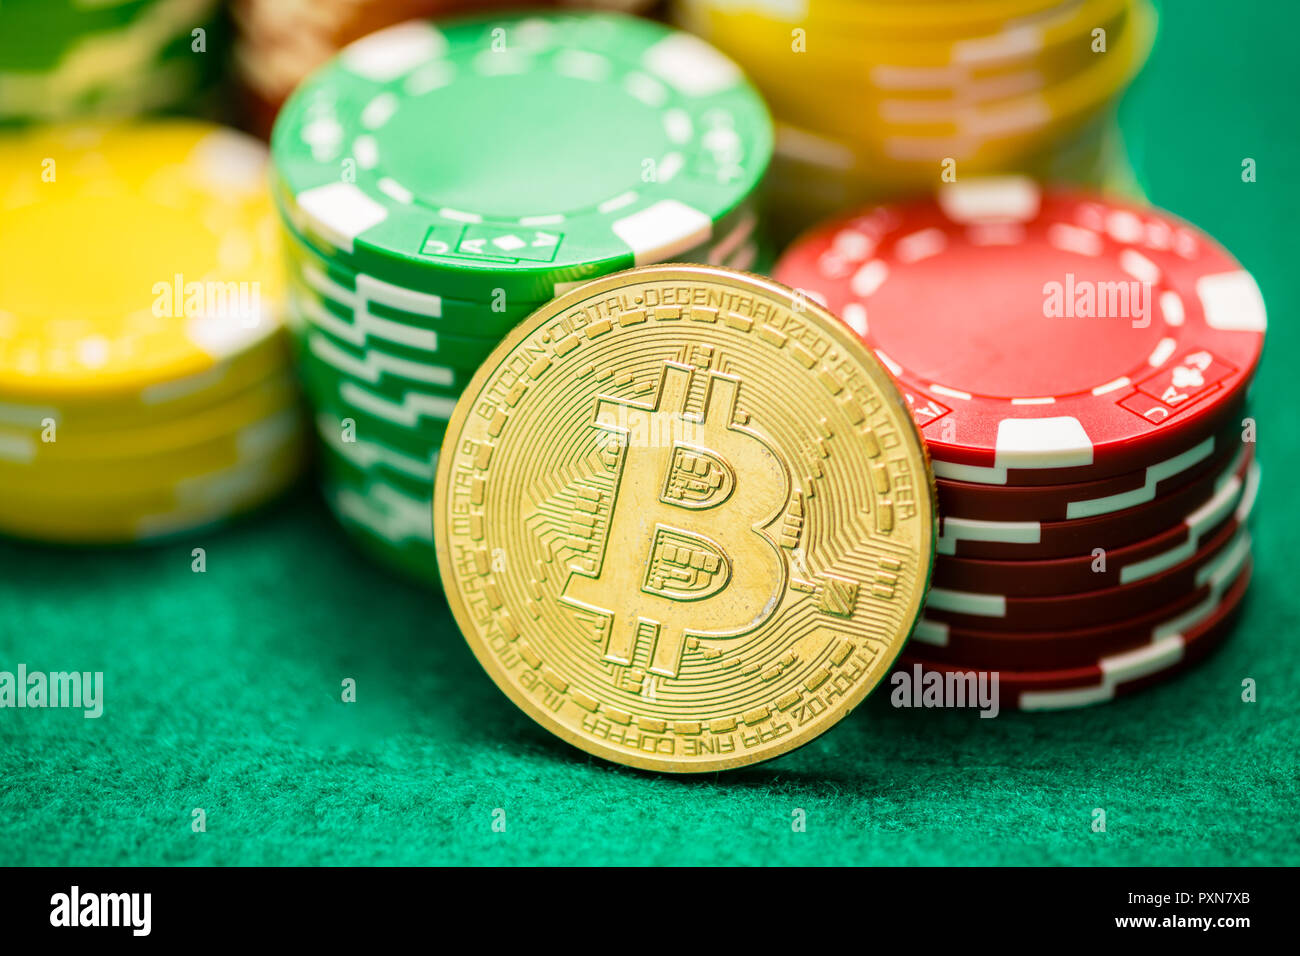 Is best bitcoin casino Worth $ To You?